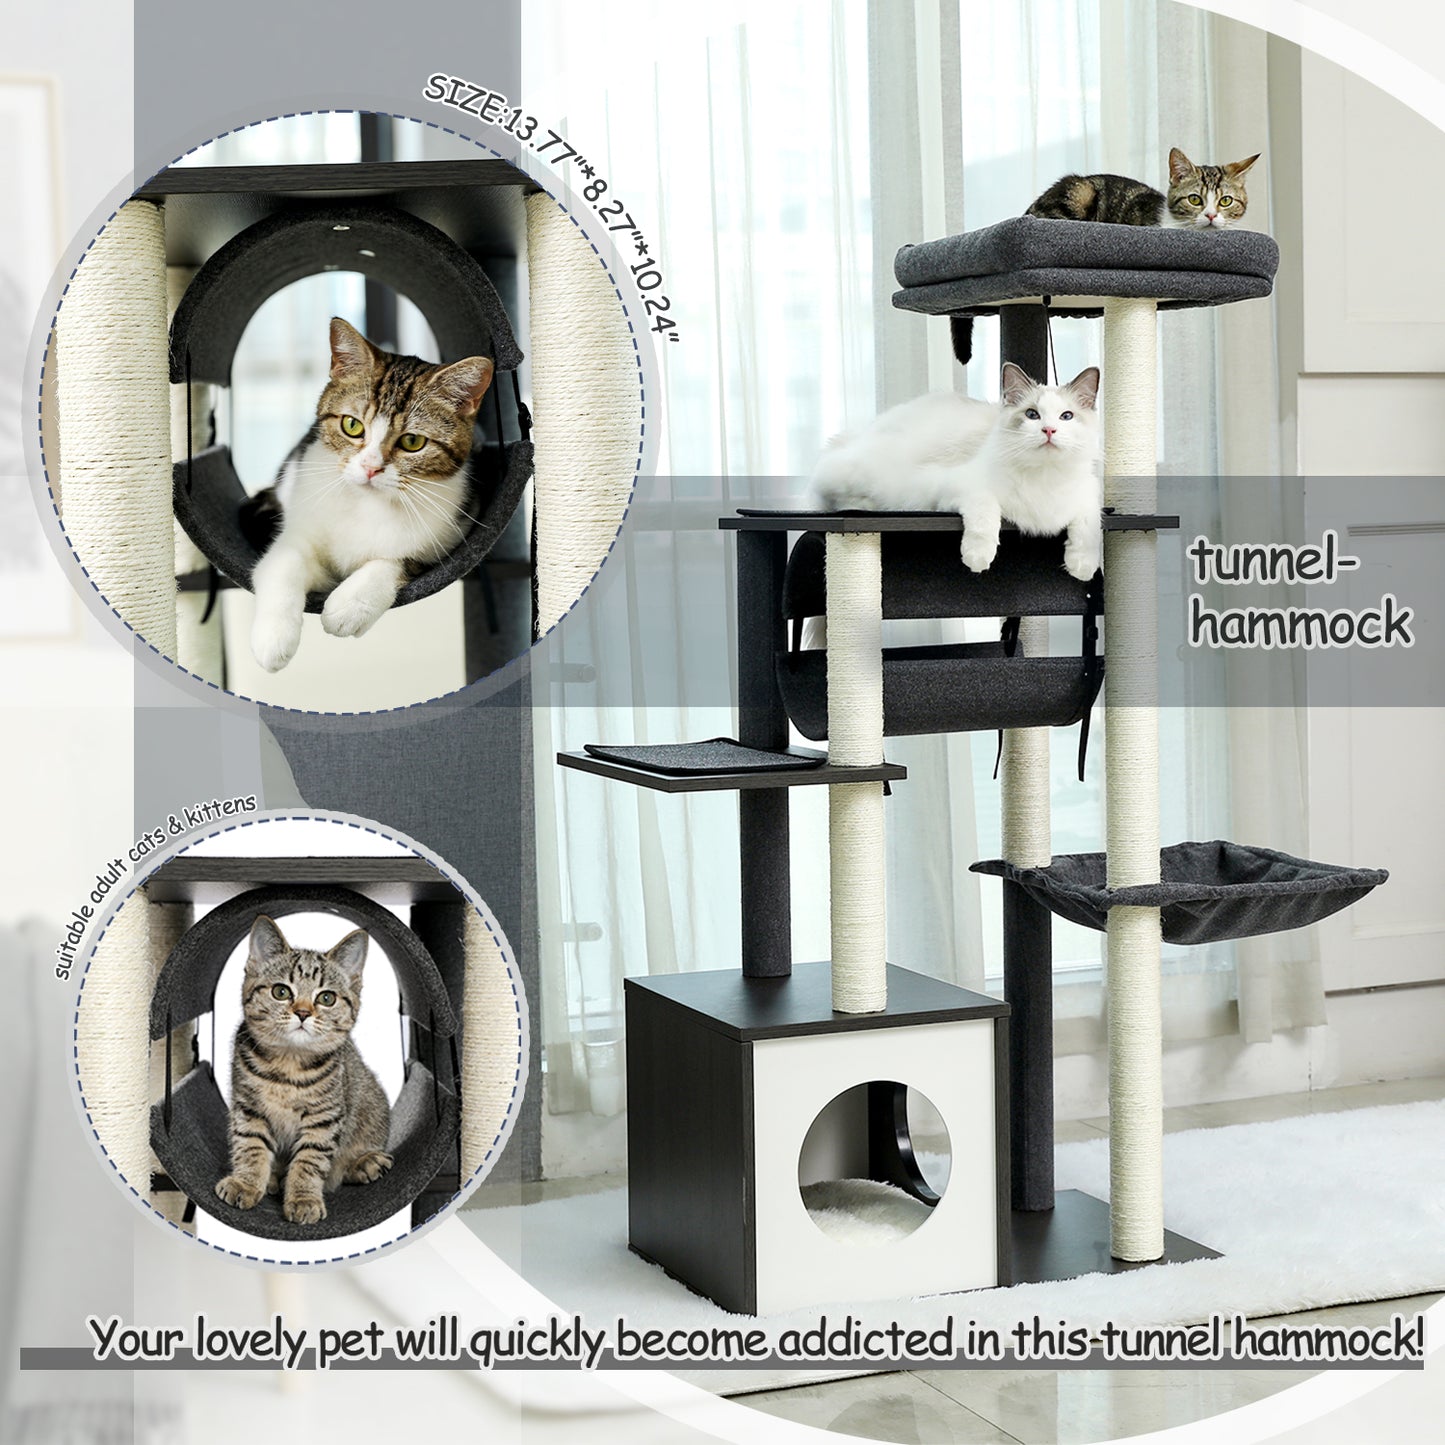 PAWZ Road 130.5cm Cat Tree Scratching Post Tower Condo House Black